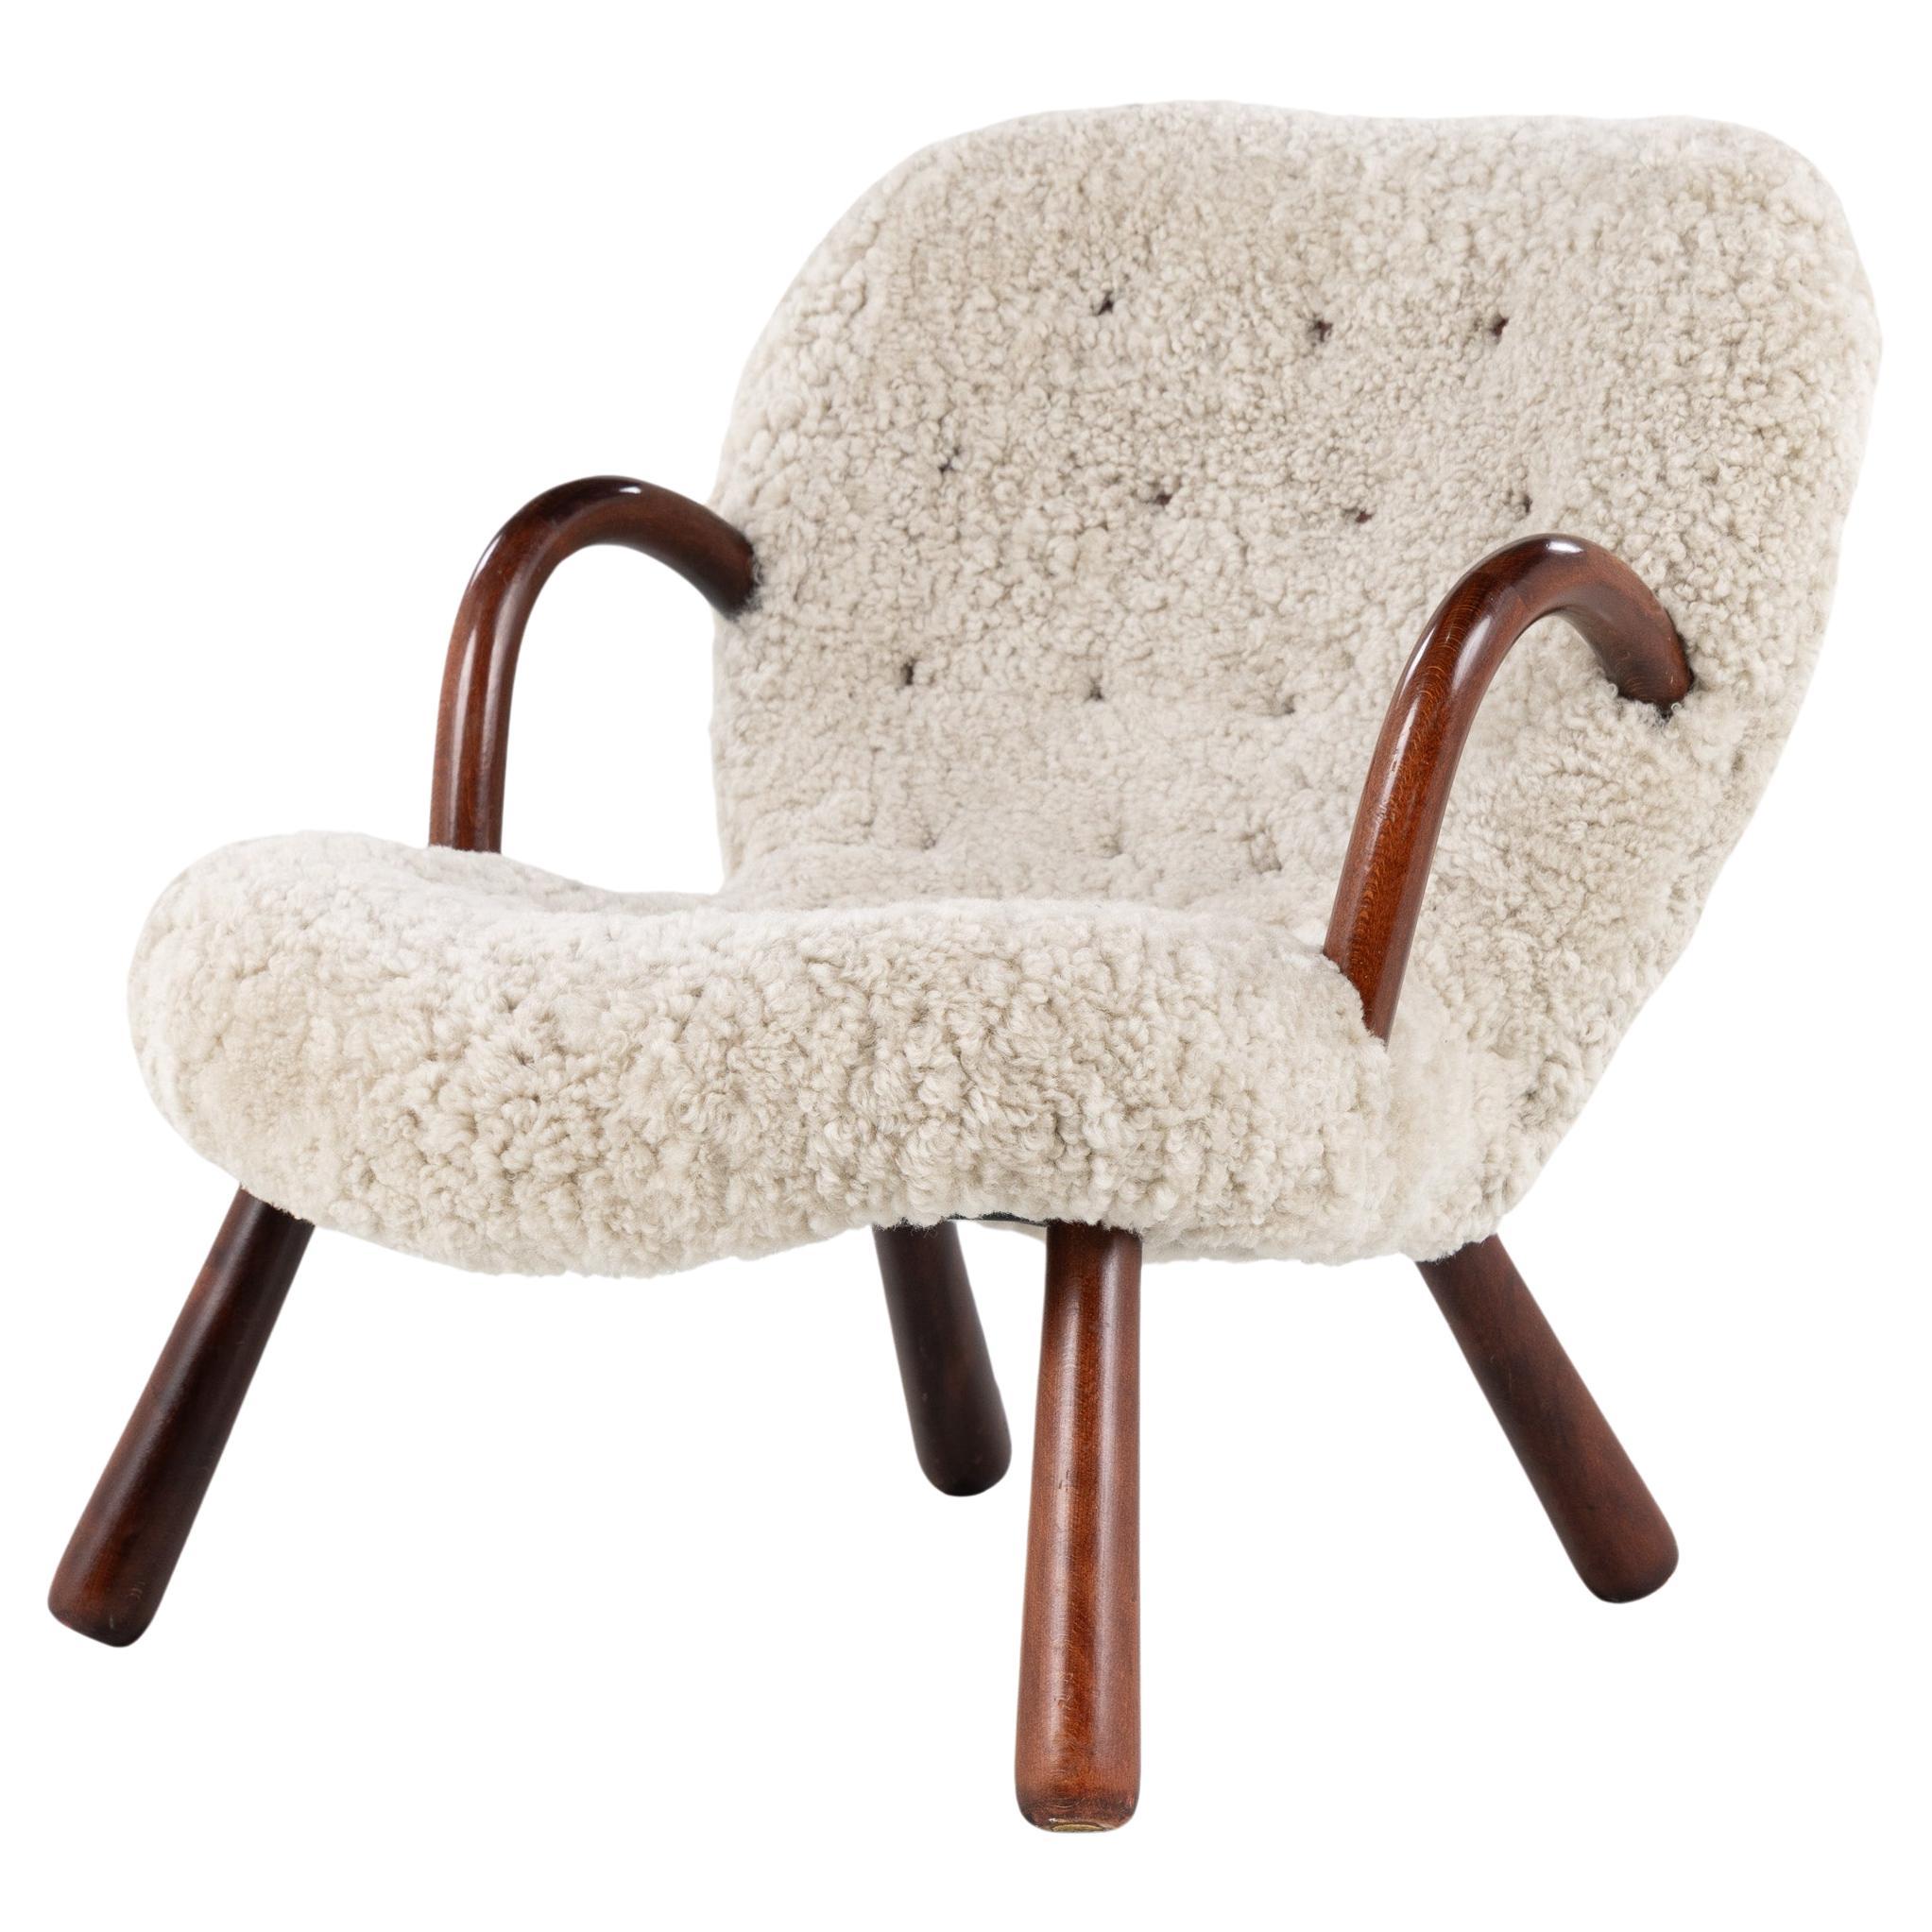 Original Clam Chair in lambskin by Arnold Madsen